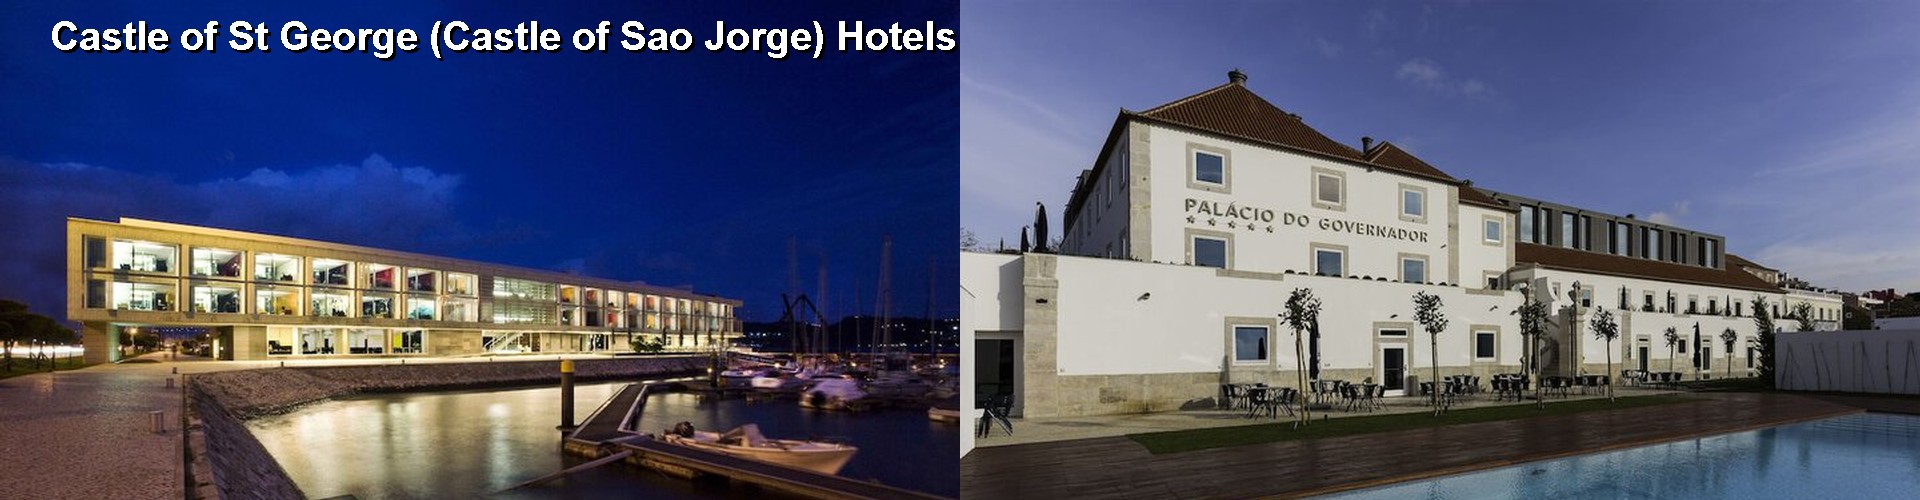 5 Best Hotels near Castle of St George (Castle of Sao Jorge)